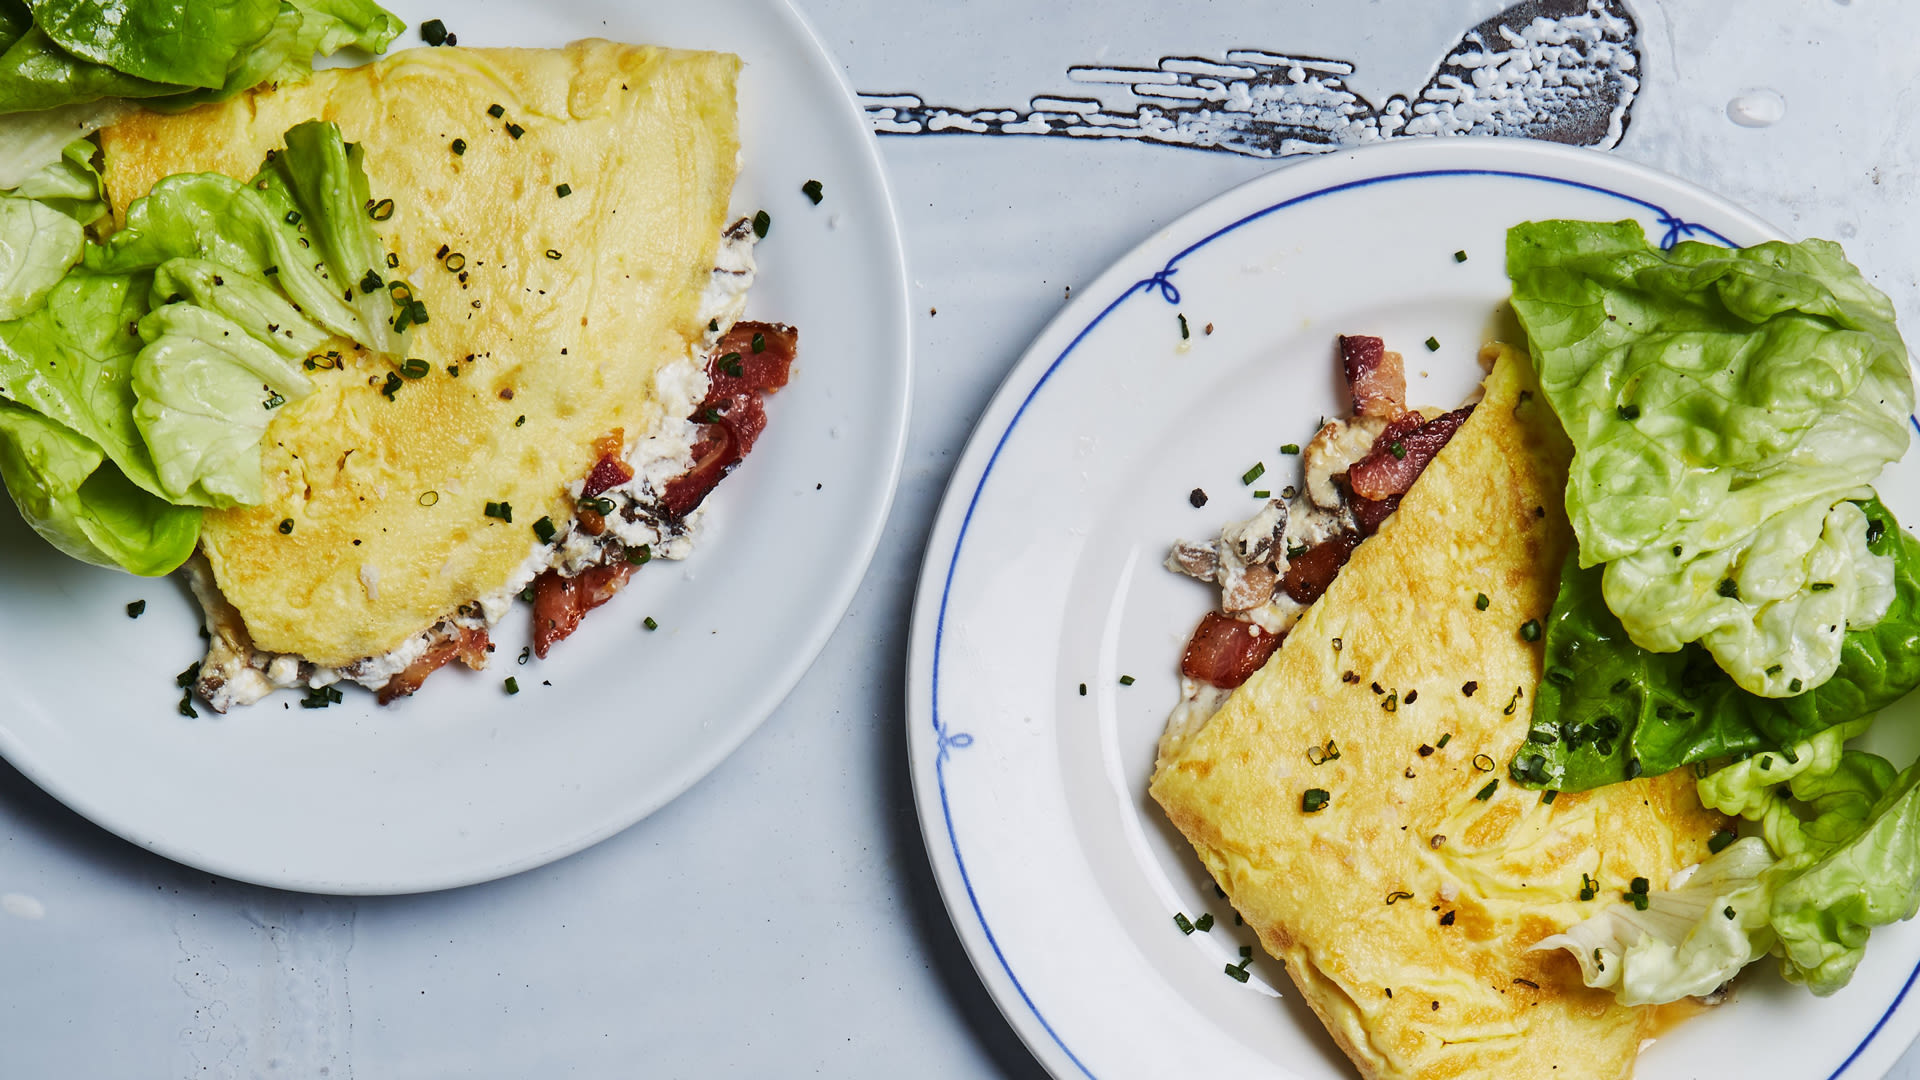 Watch Omelet With Bacon, Mushrooms, and Ricotta | Bon Appétit